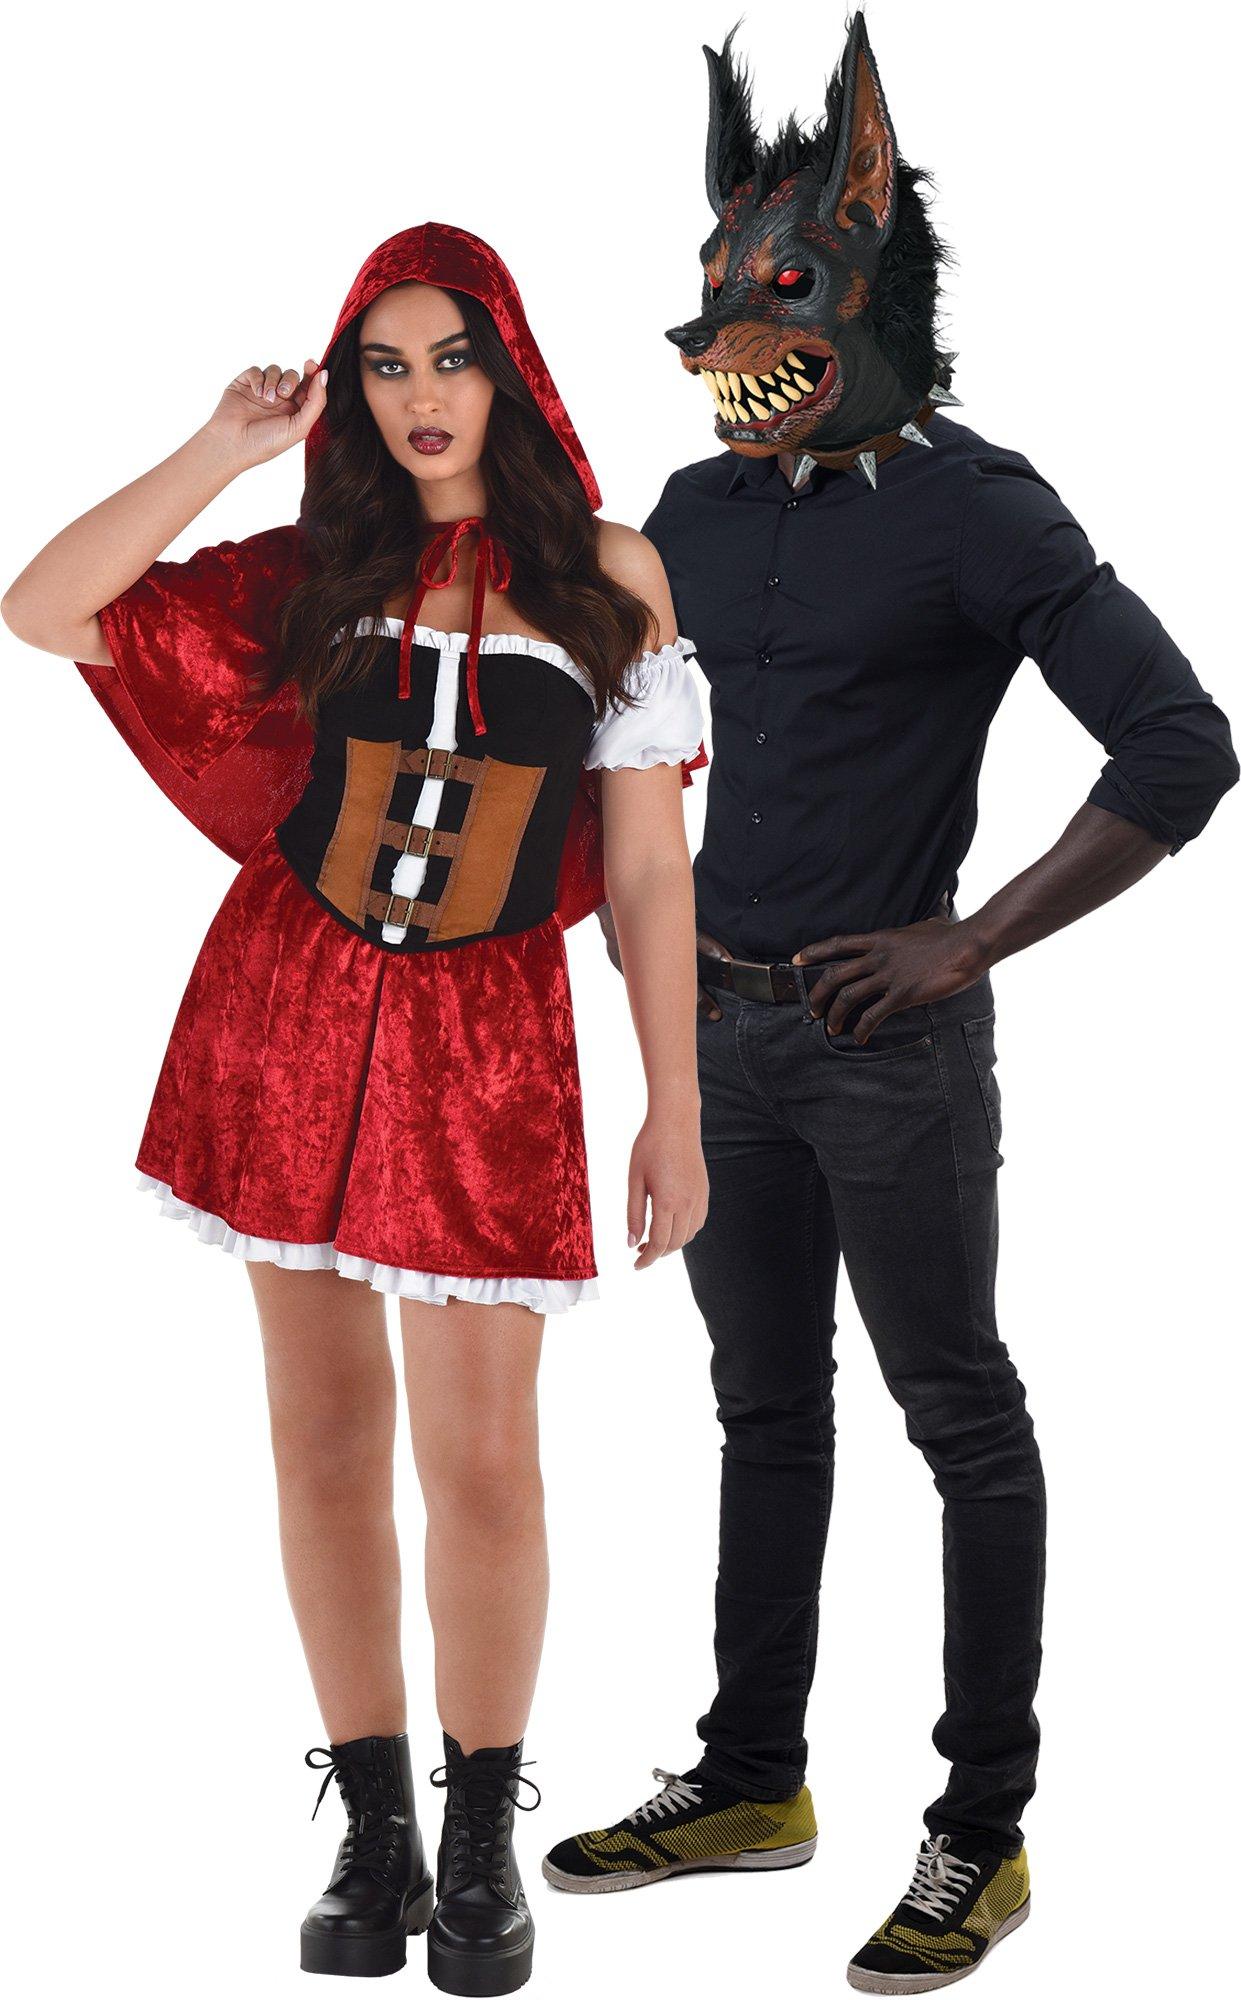 Red Riding Hood & Big Bad Wolf Couples Costumes